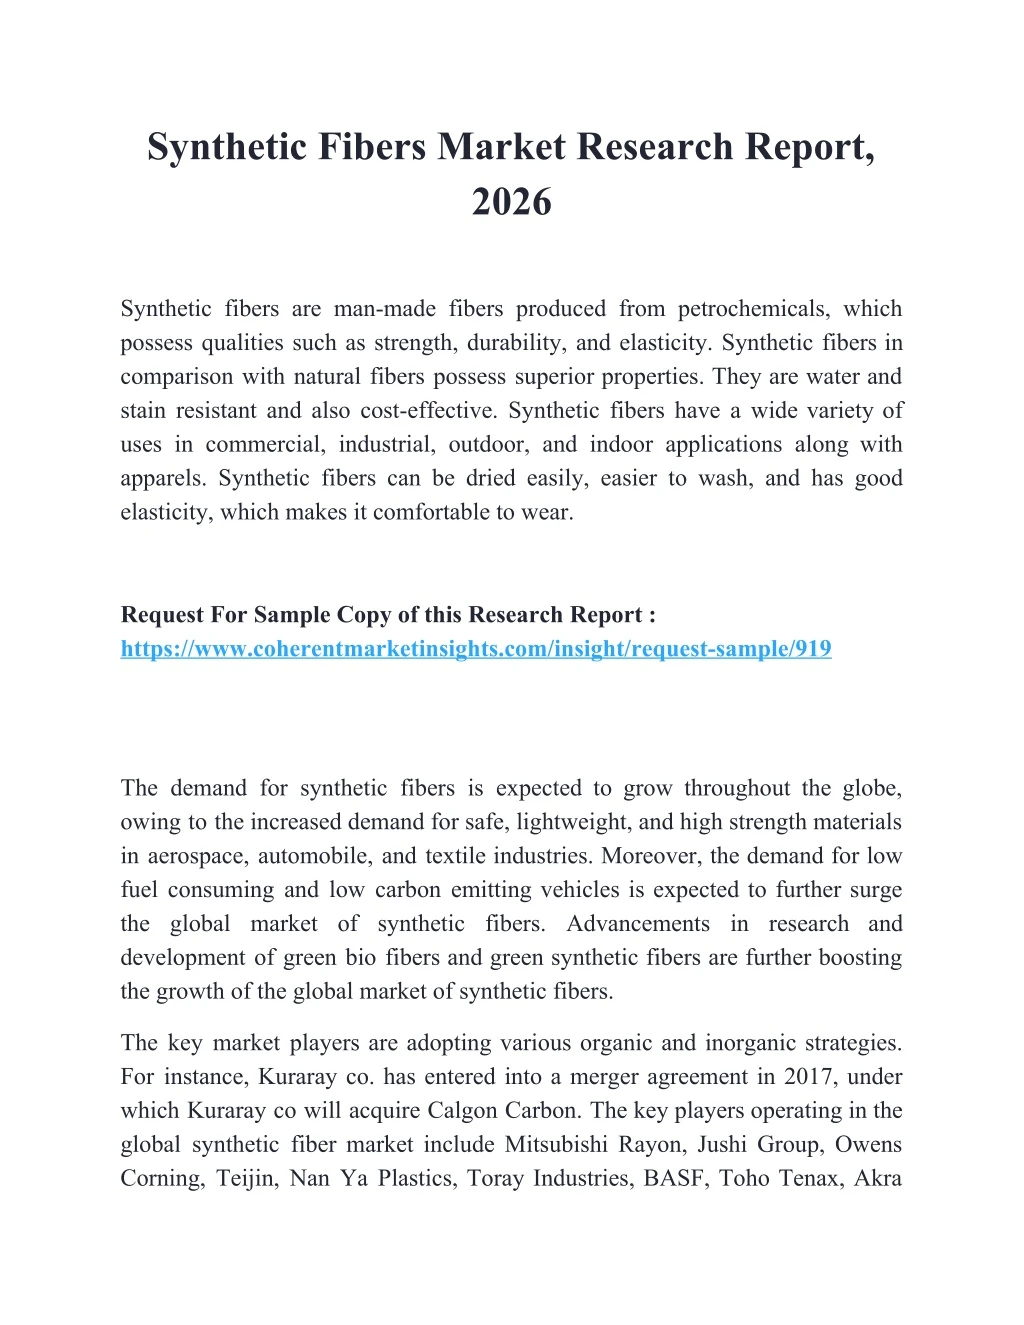 synthetic fibers market research report 2026